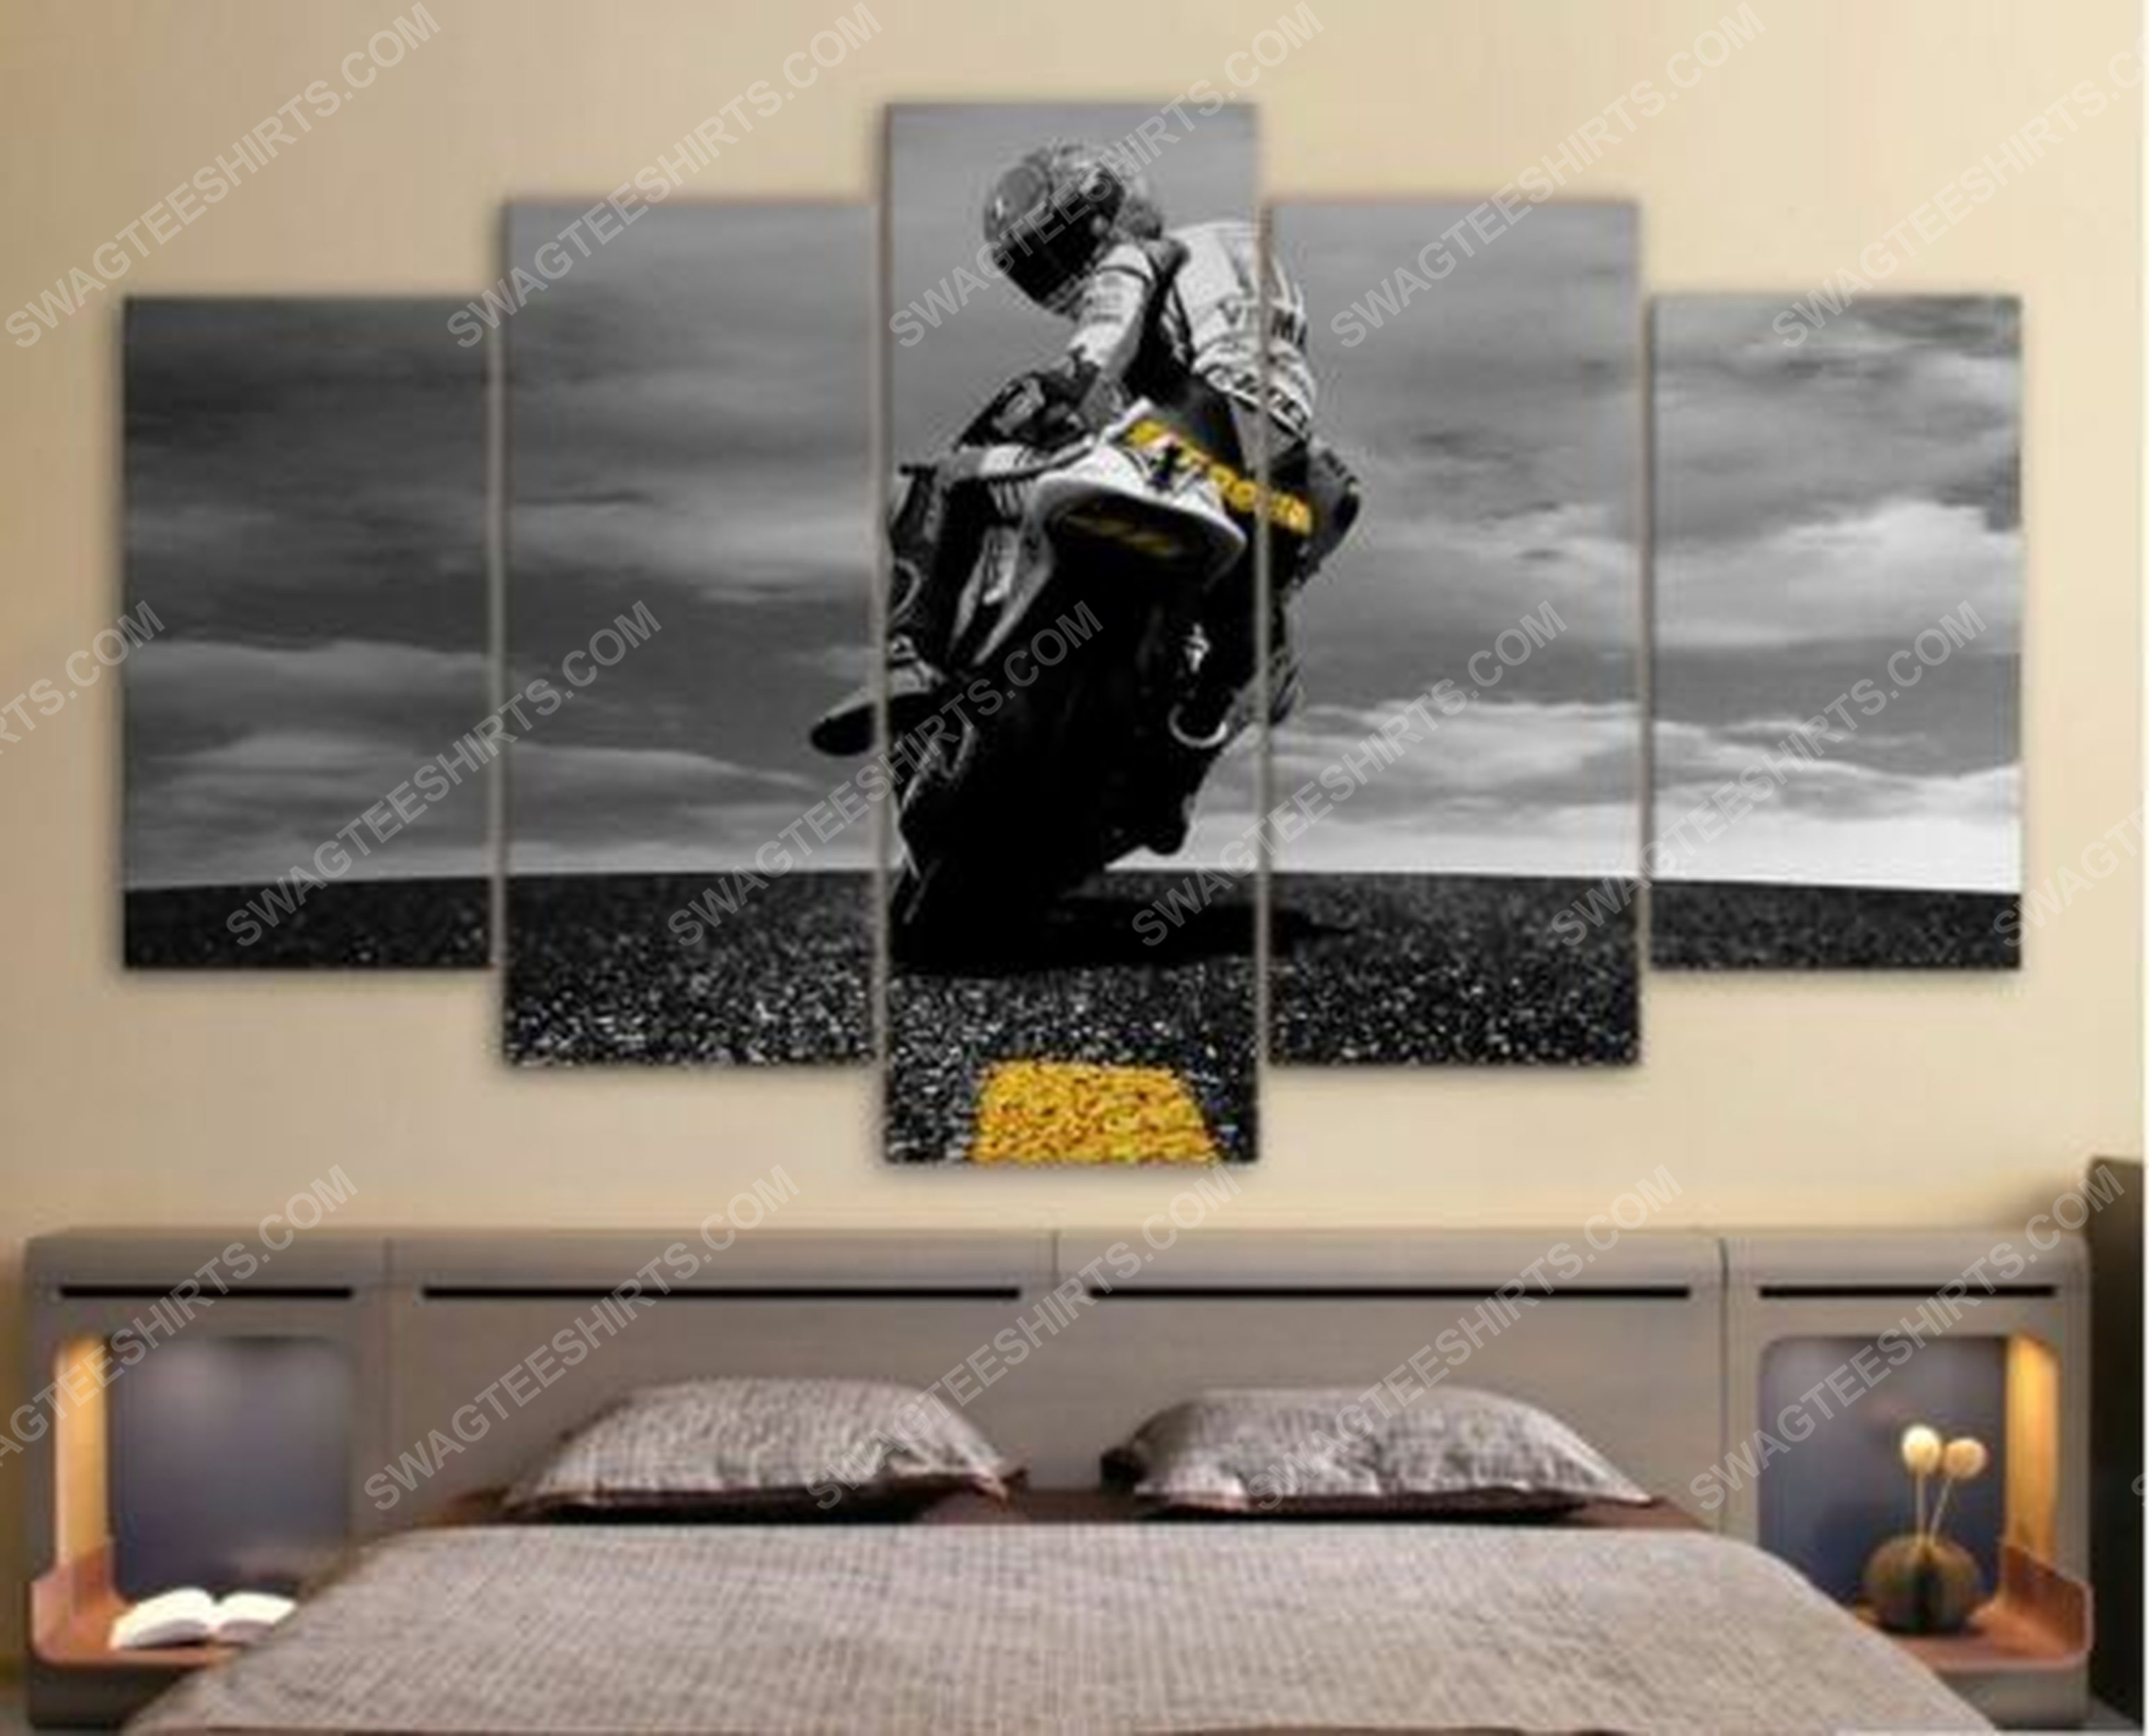 [special edition] Motorcycle racer road motorbike print painting canvas wall art home decor – maria